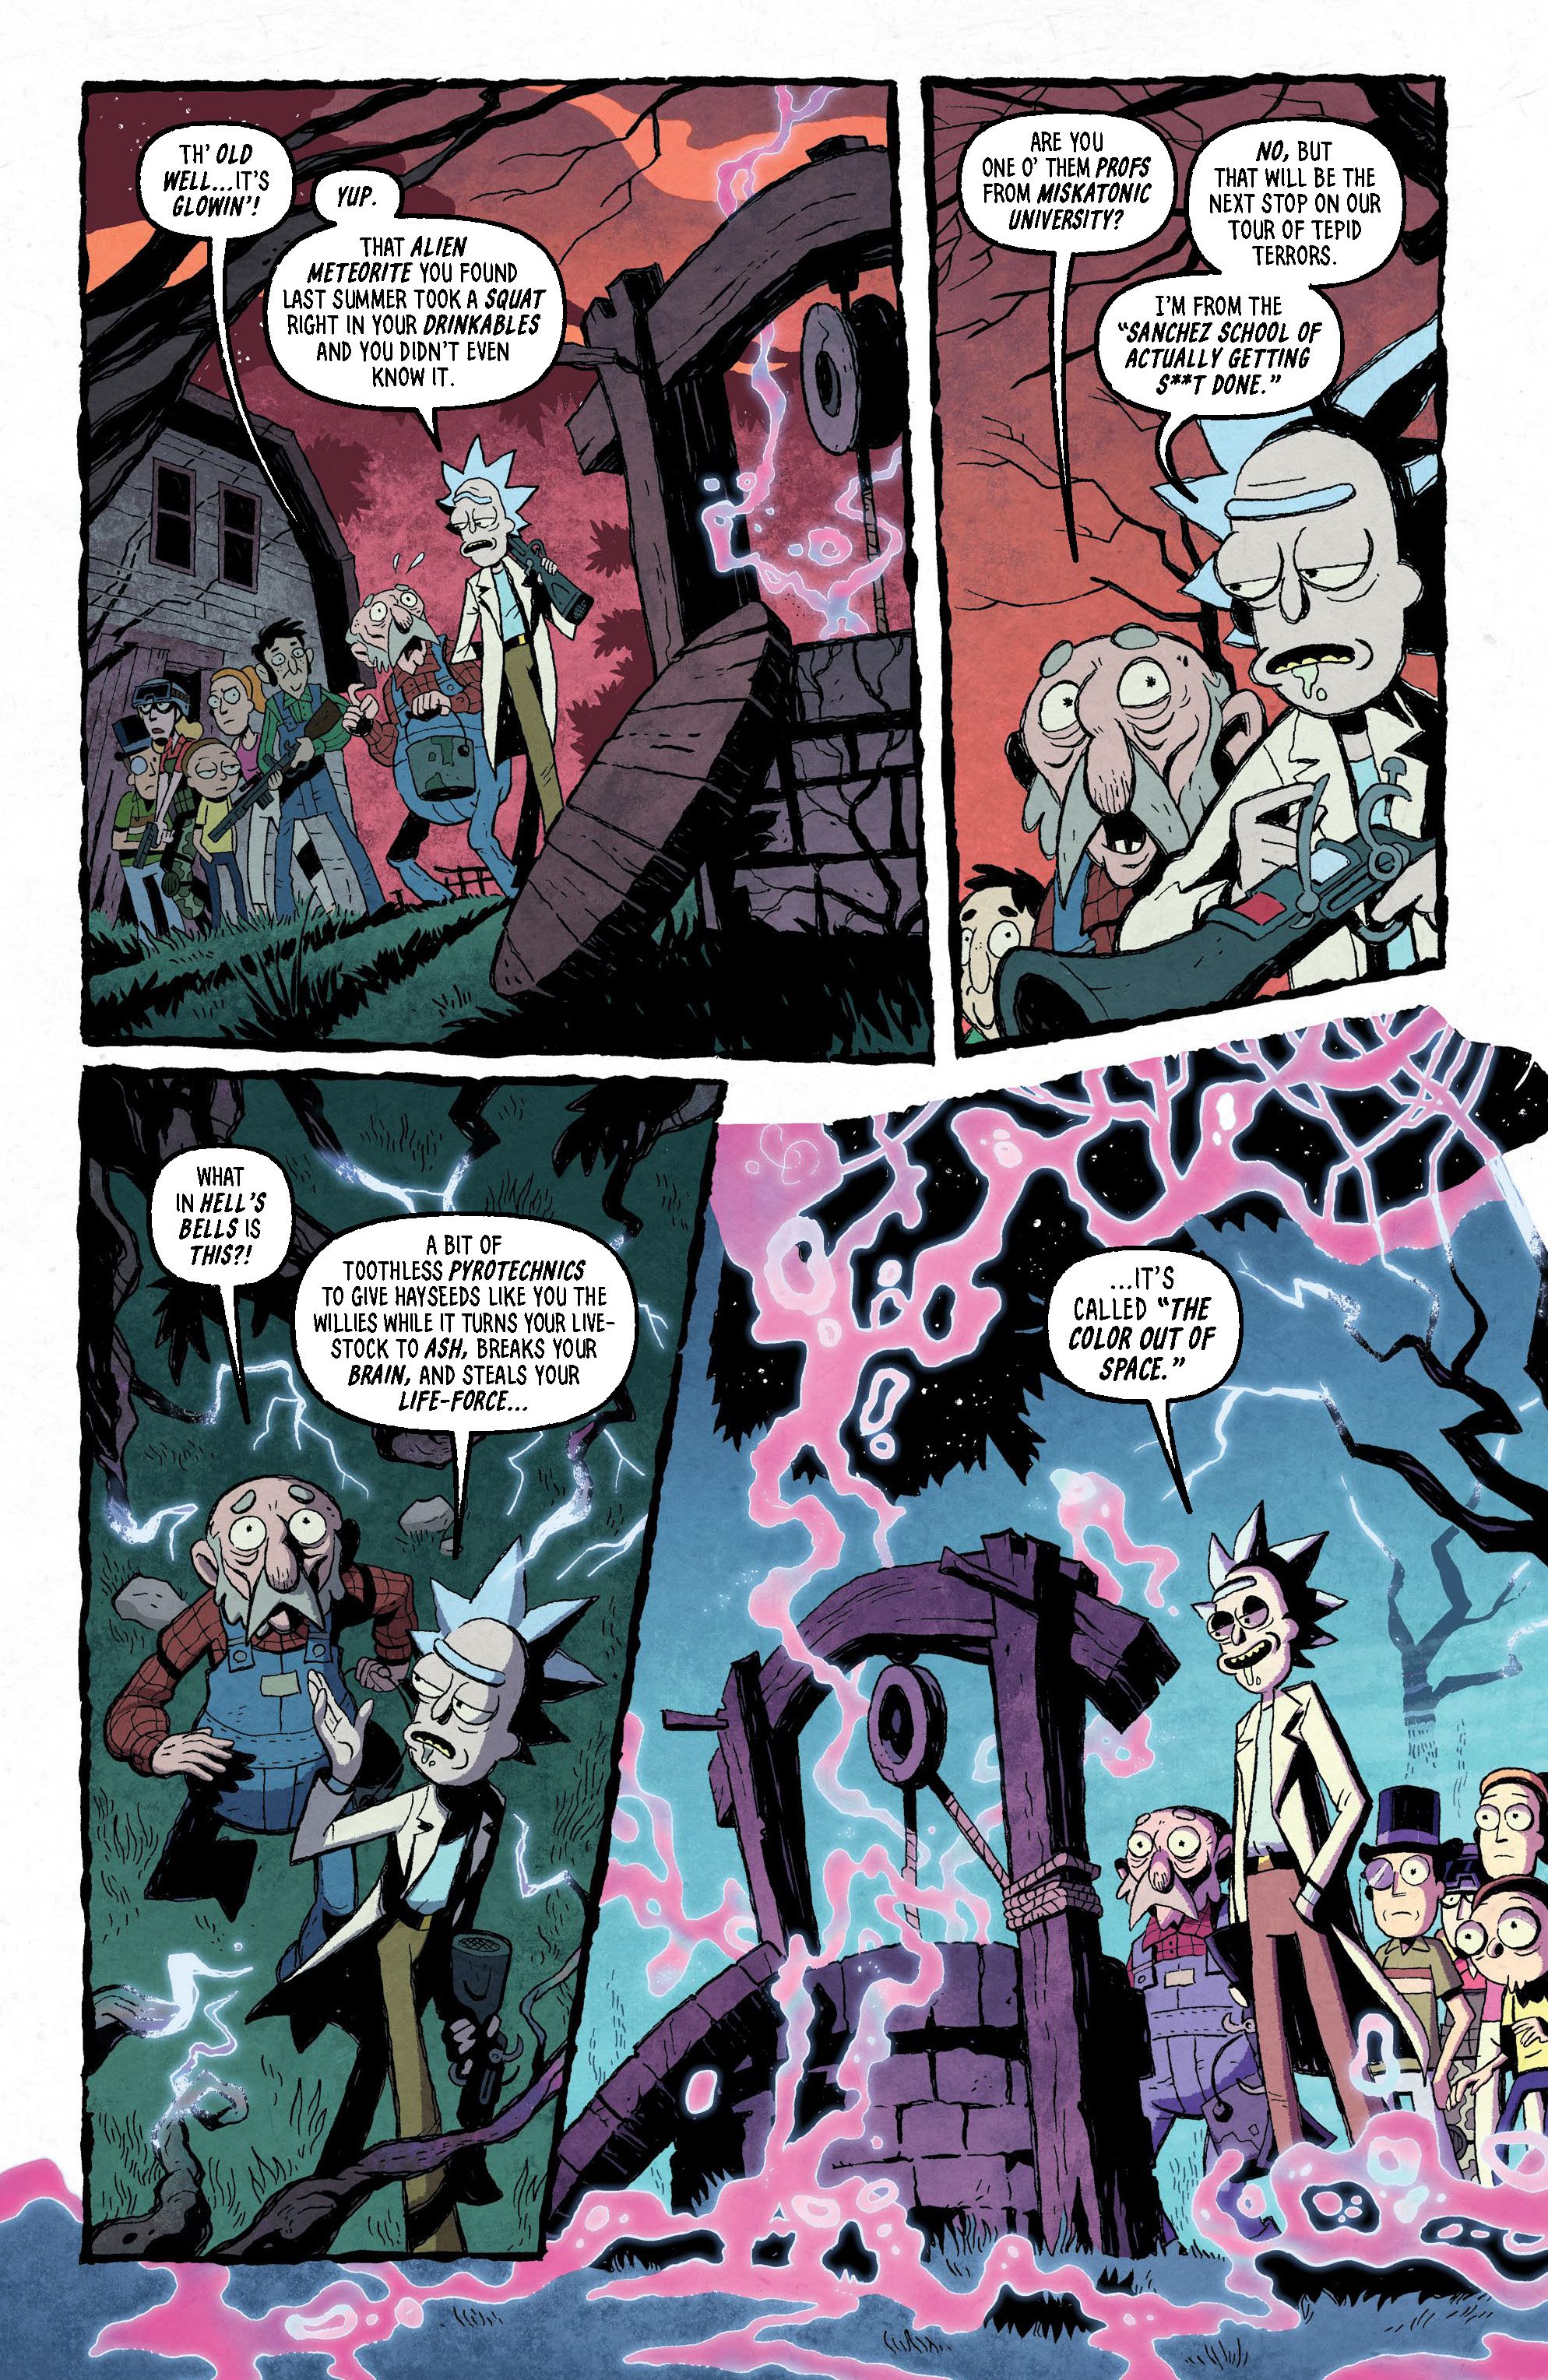 Pages from RICKMORTY CTHULHU #1 Digital Galley_Page_5